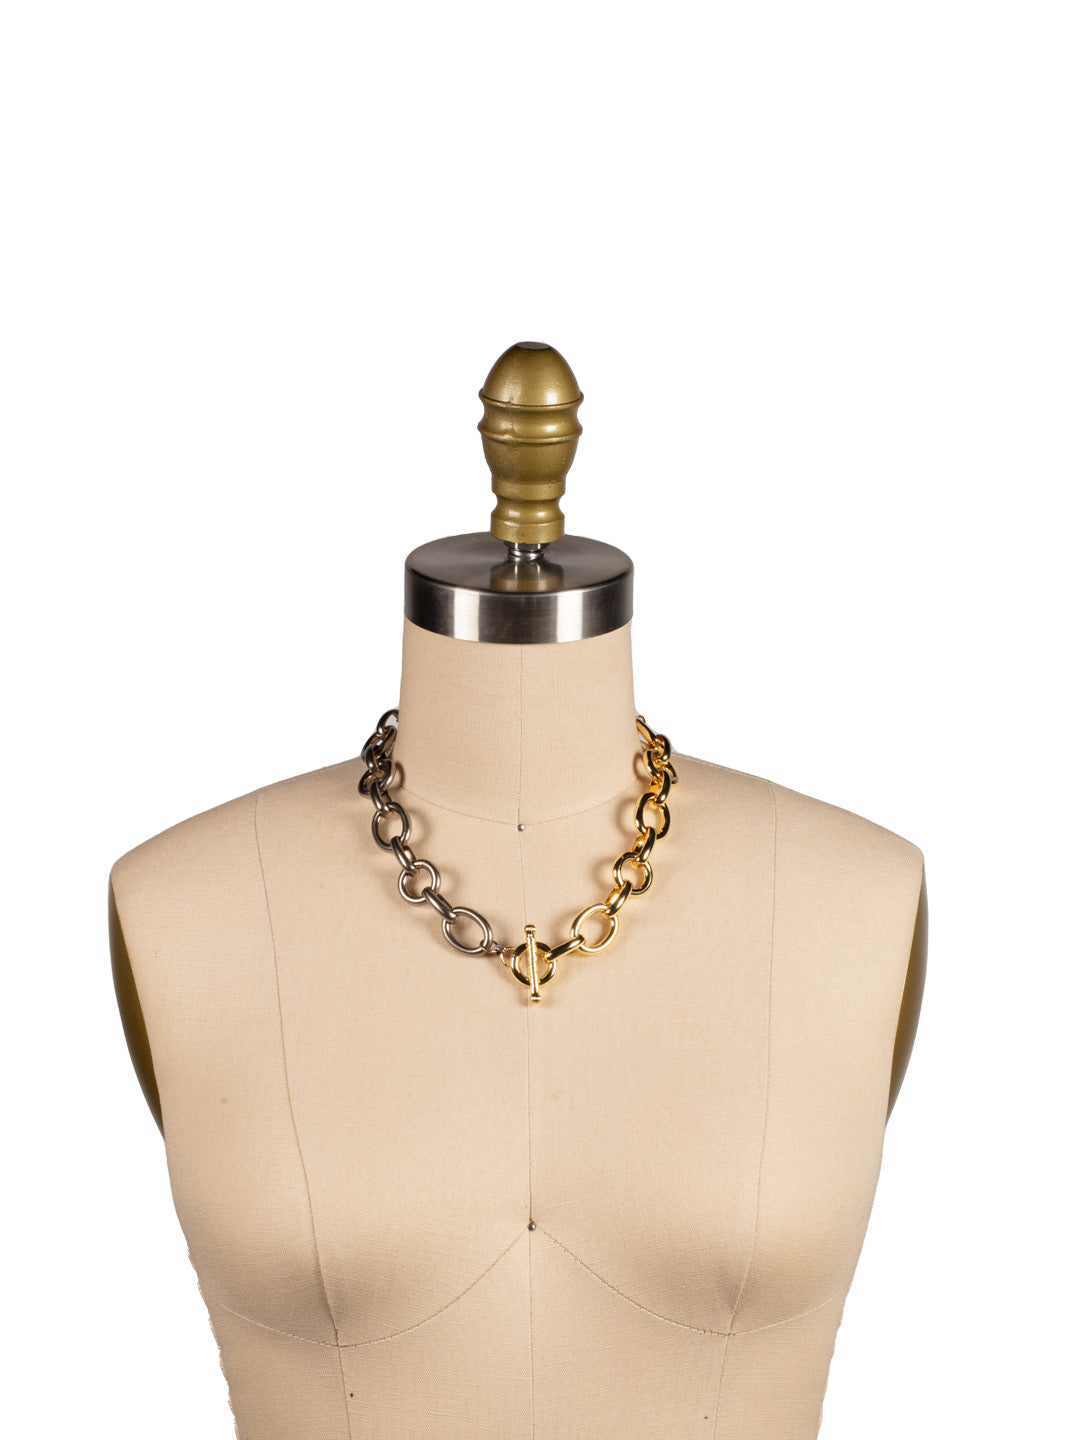 Gold Chunky Chain Necklace Statement Necklace Chain Link 